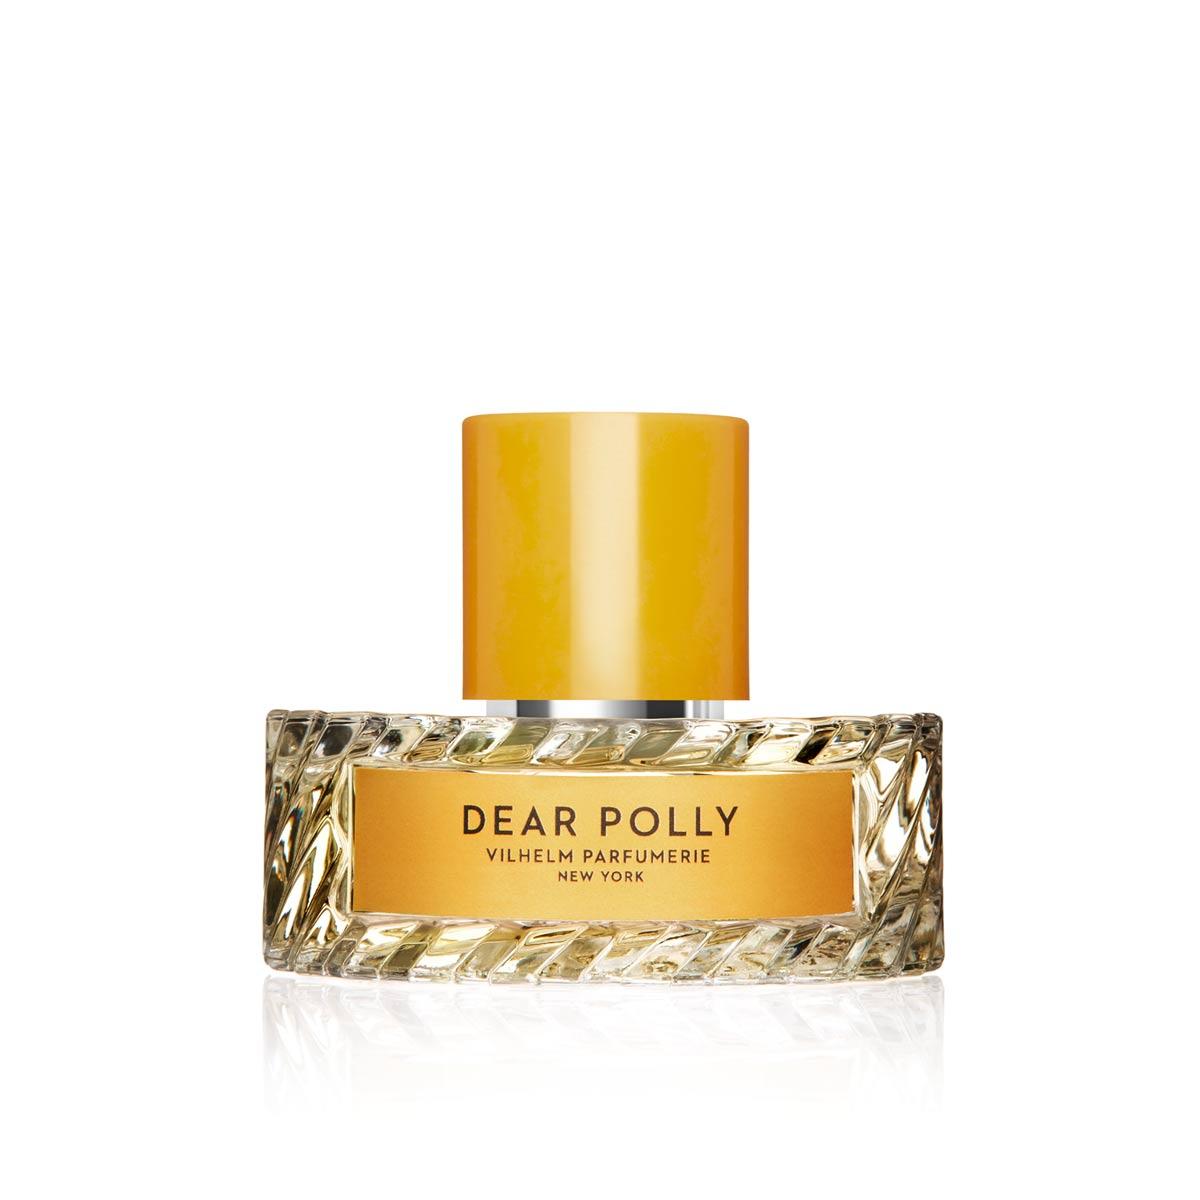 Primary image of Dear Polly EDP